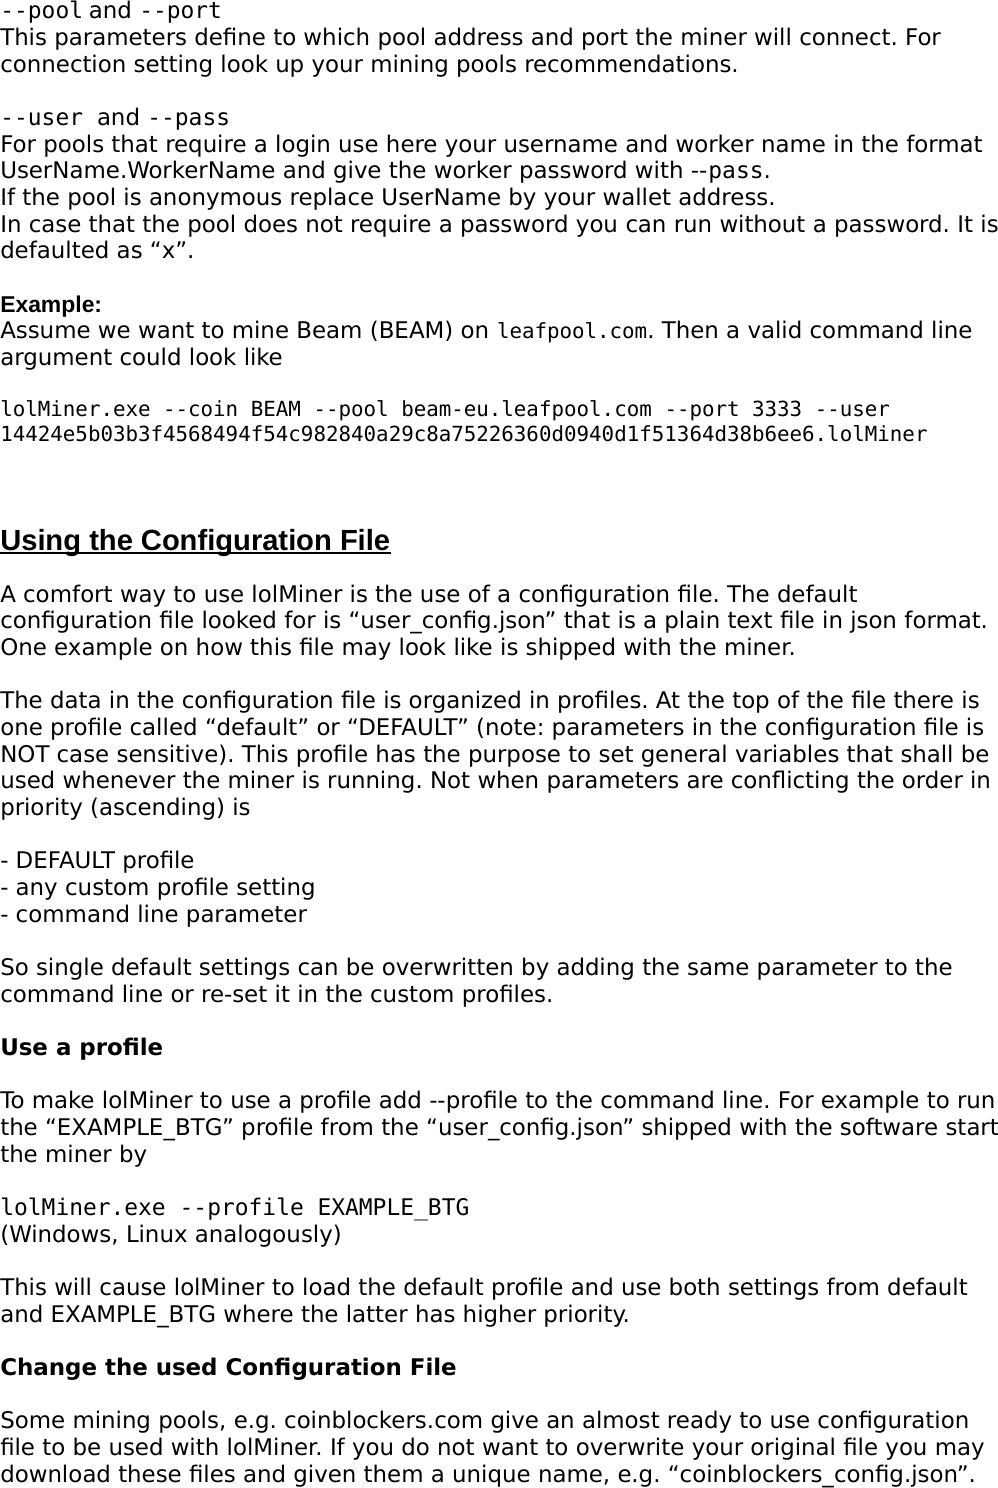 Page 2 of 9 - Lol Miner Manual